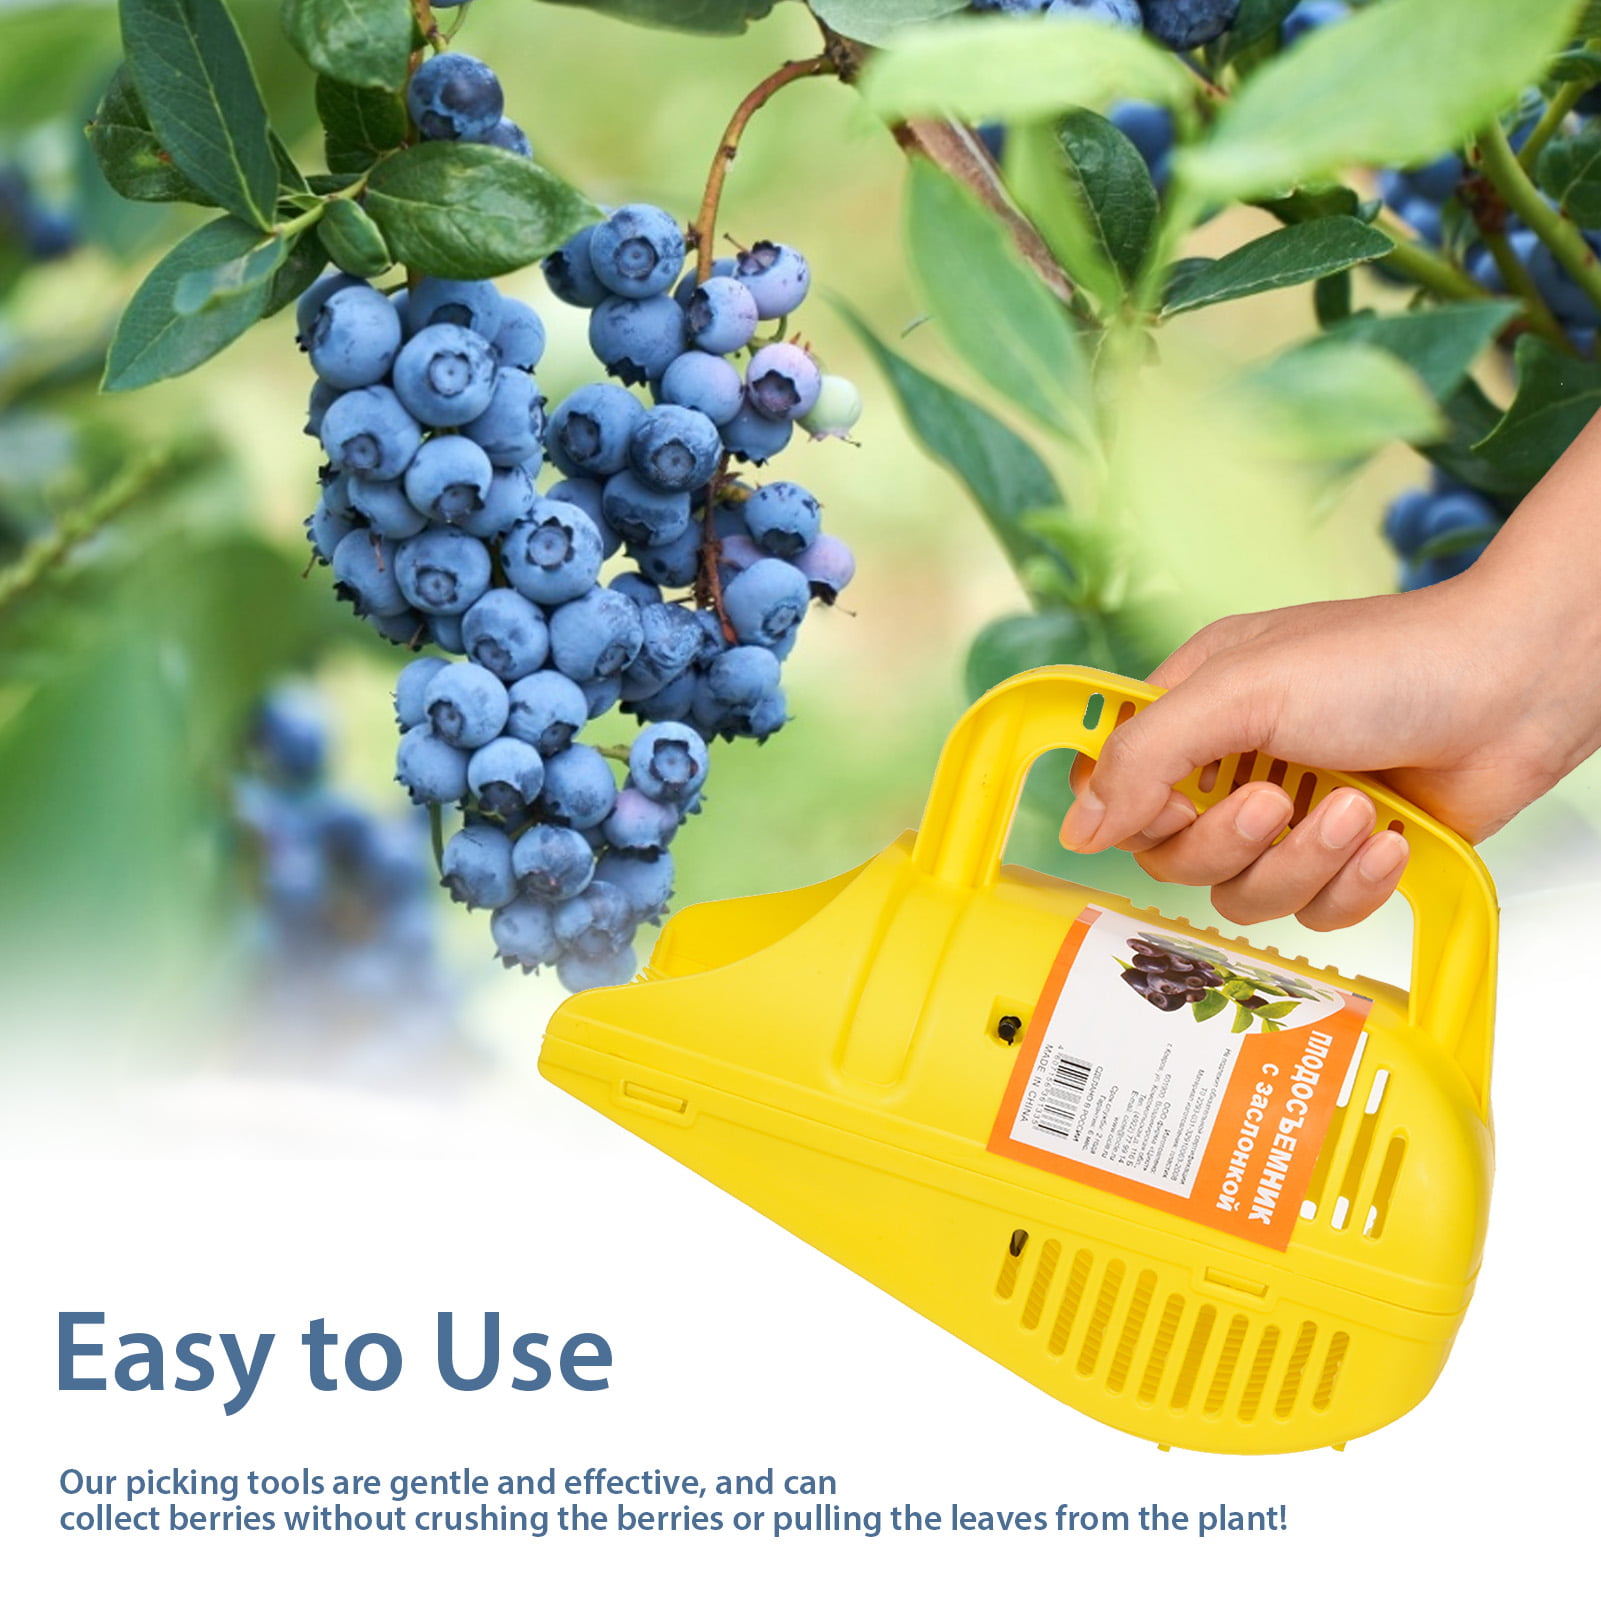 Ergonomic Soft-Touch Handle Easy to Use Free Saving Your Time Picker for Picking Berries serviceable Plastic Berry Picker with Comb Blueberry Rake Scoop for Fruit Harvesting Blueberry Picker